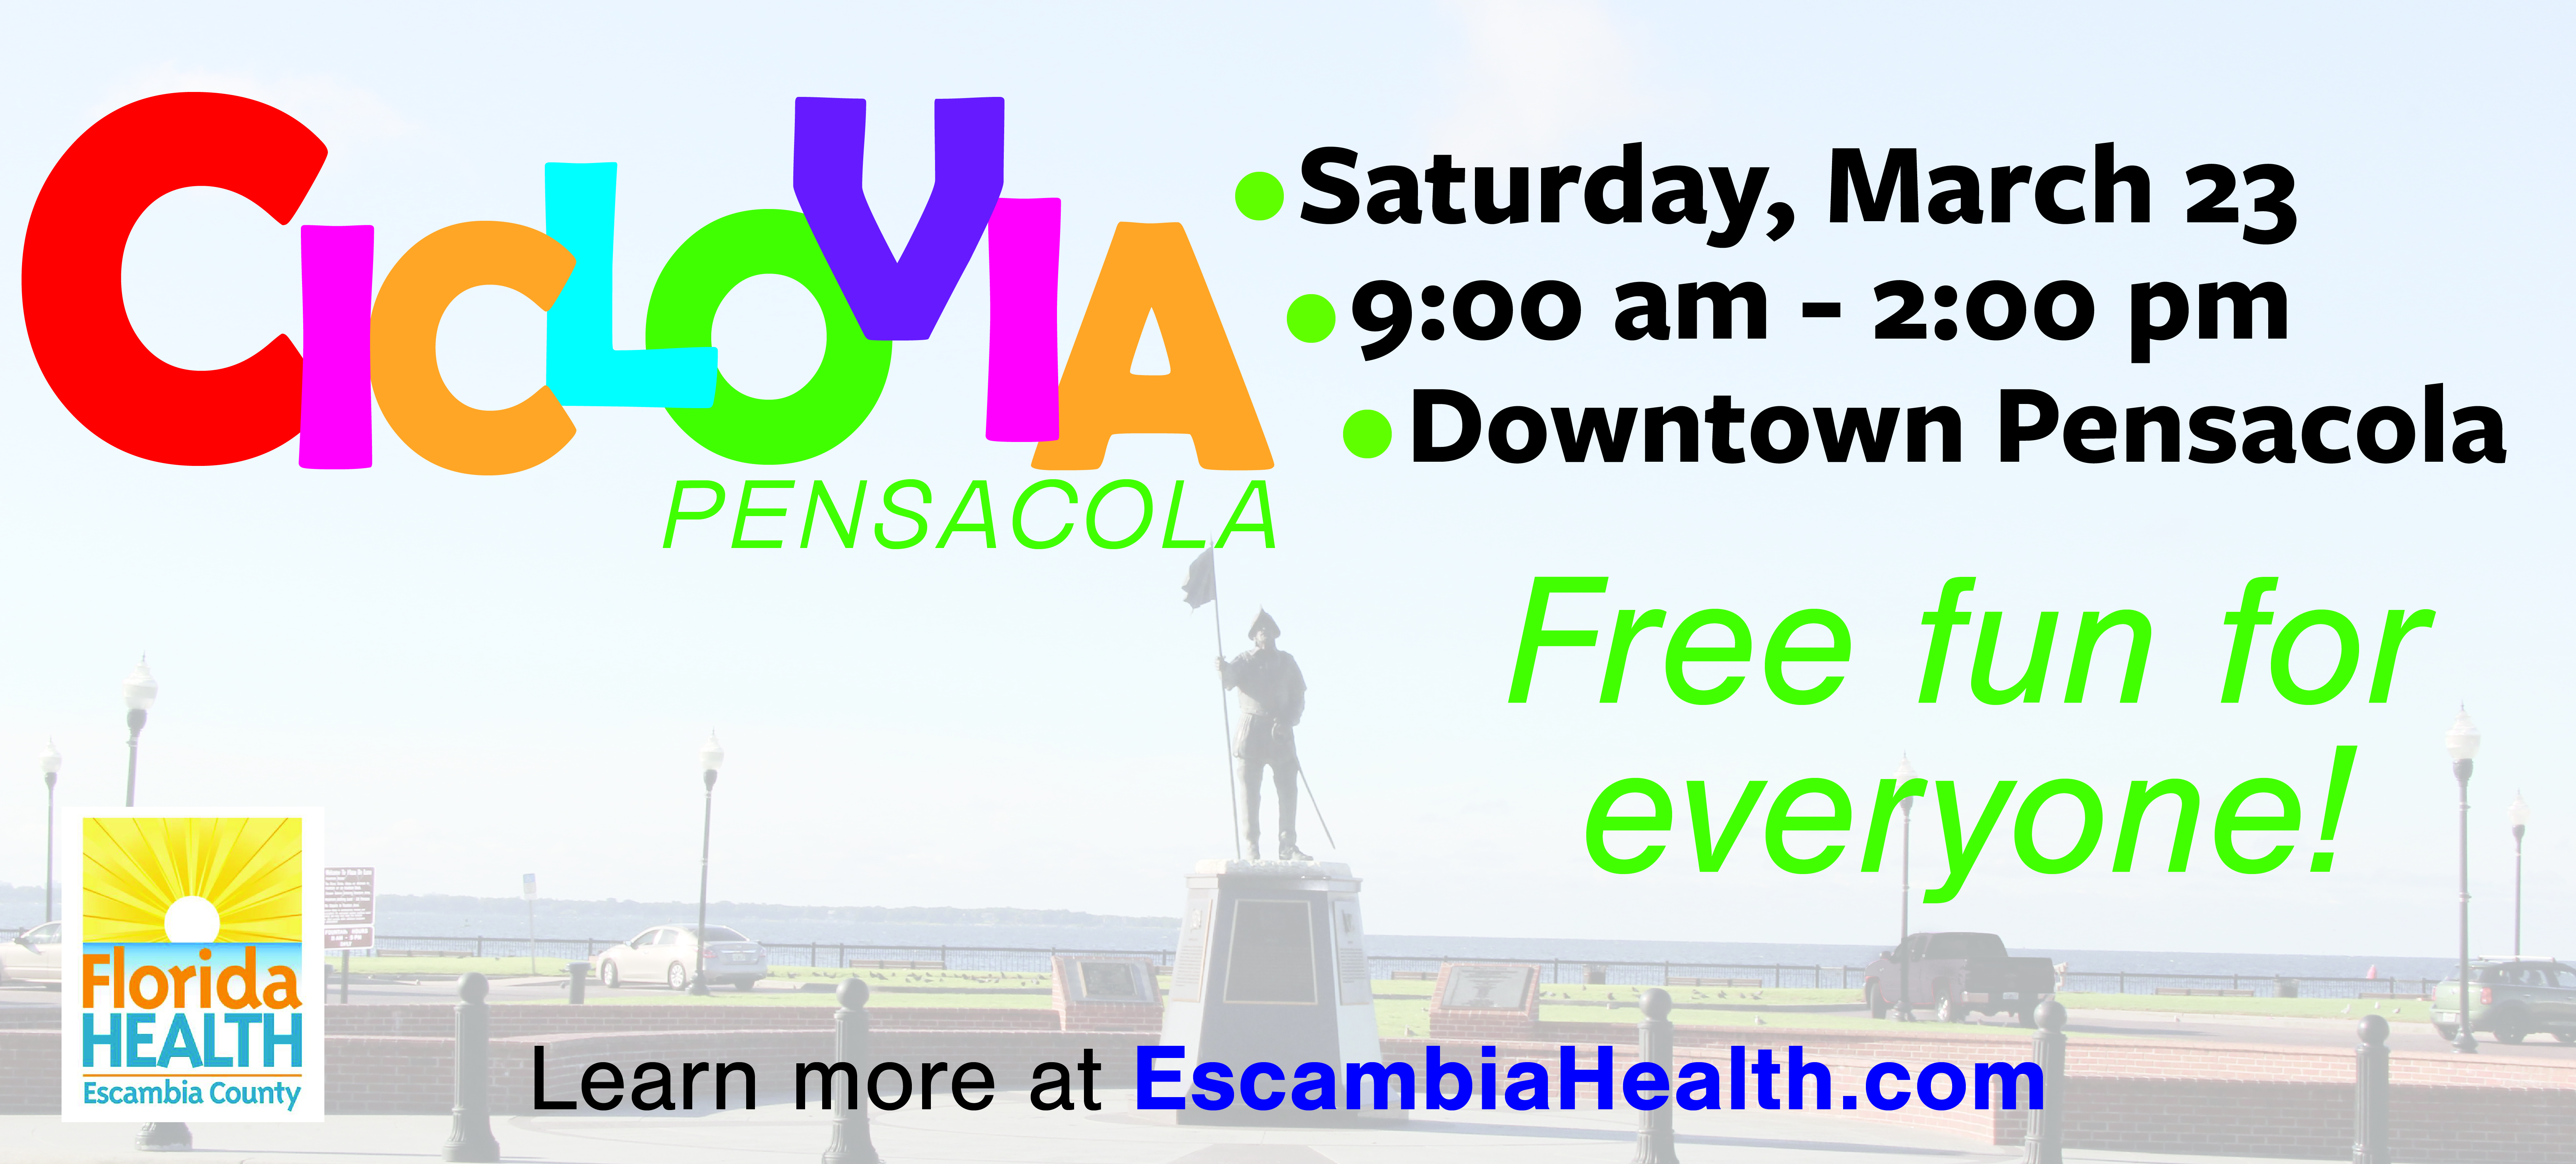 Ciclovia Pensacola. Saturday march 23 9 AM to 2 PM downtown pensacola. Free fun for everyone learn more at escambia health.com